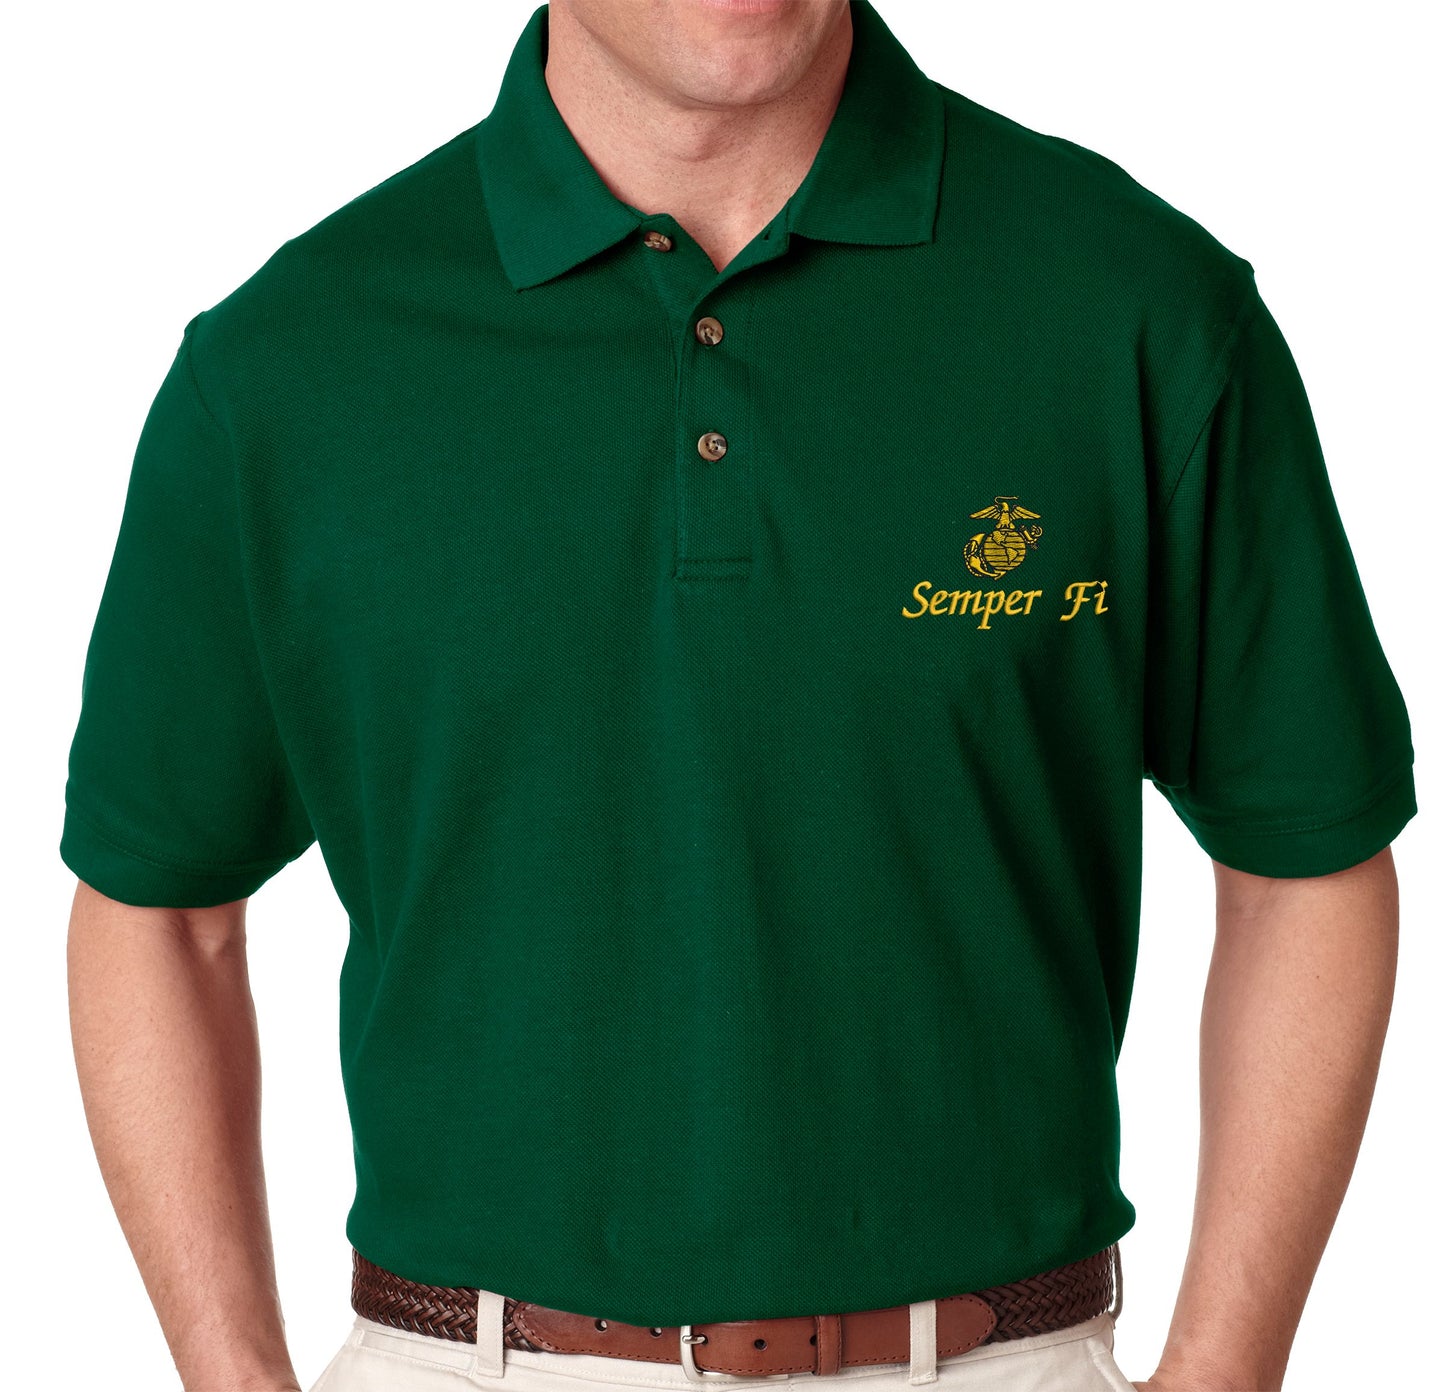 Semper Fi with Eagle, Globe and Anchor Polo Shirt